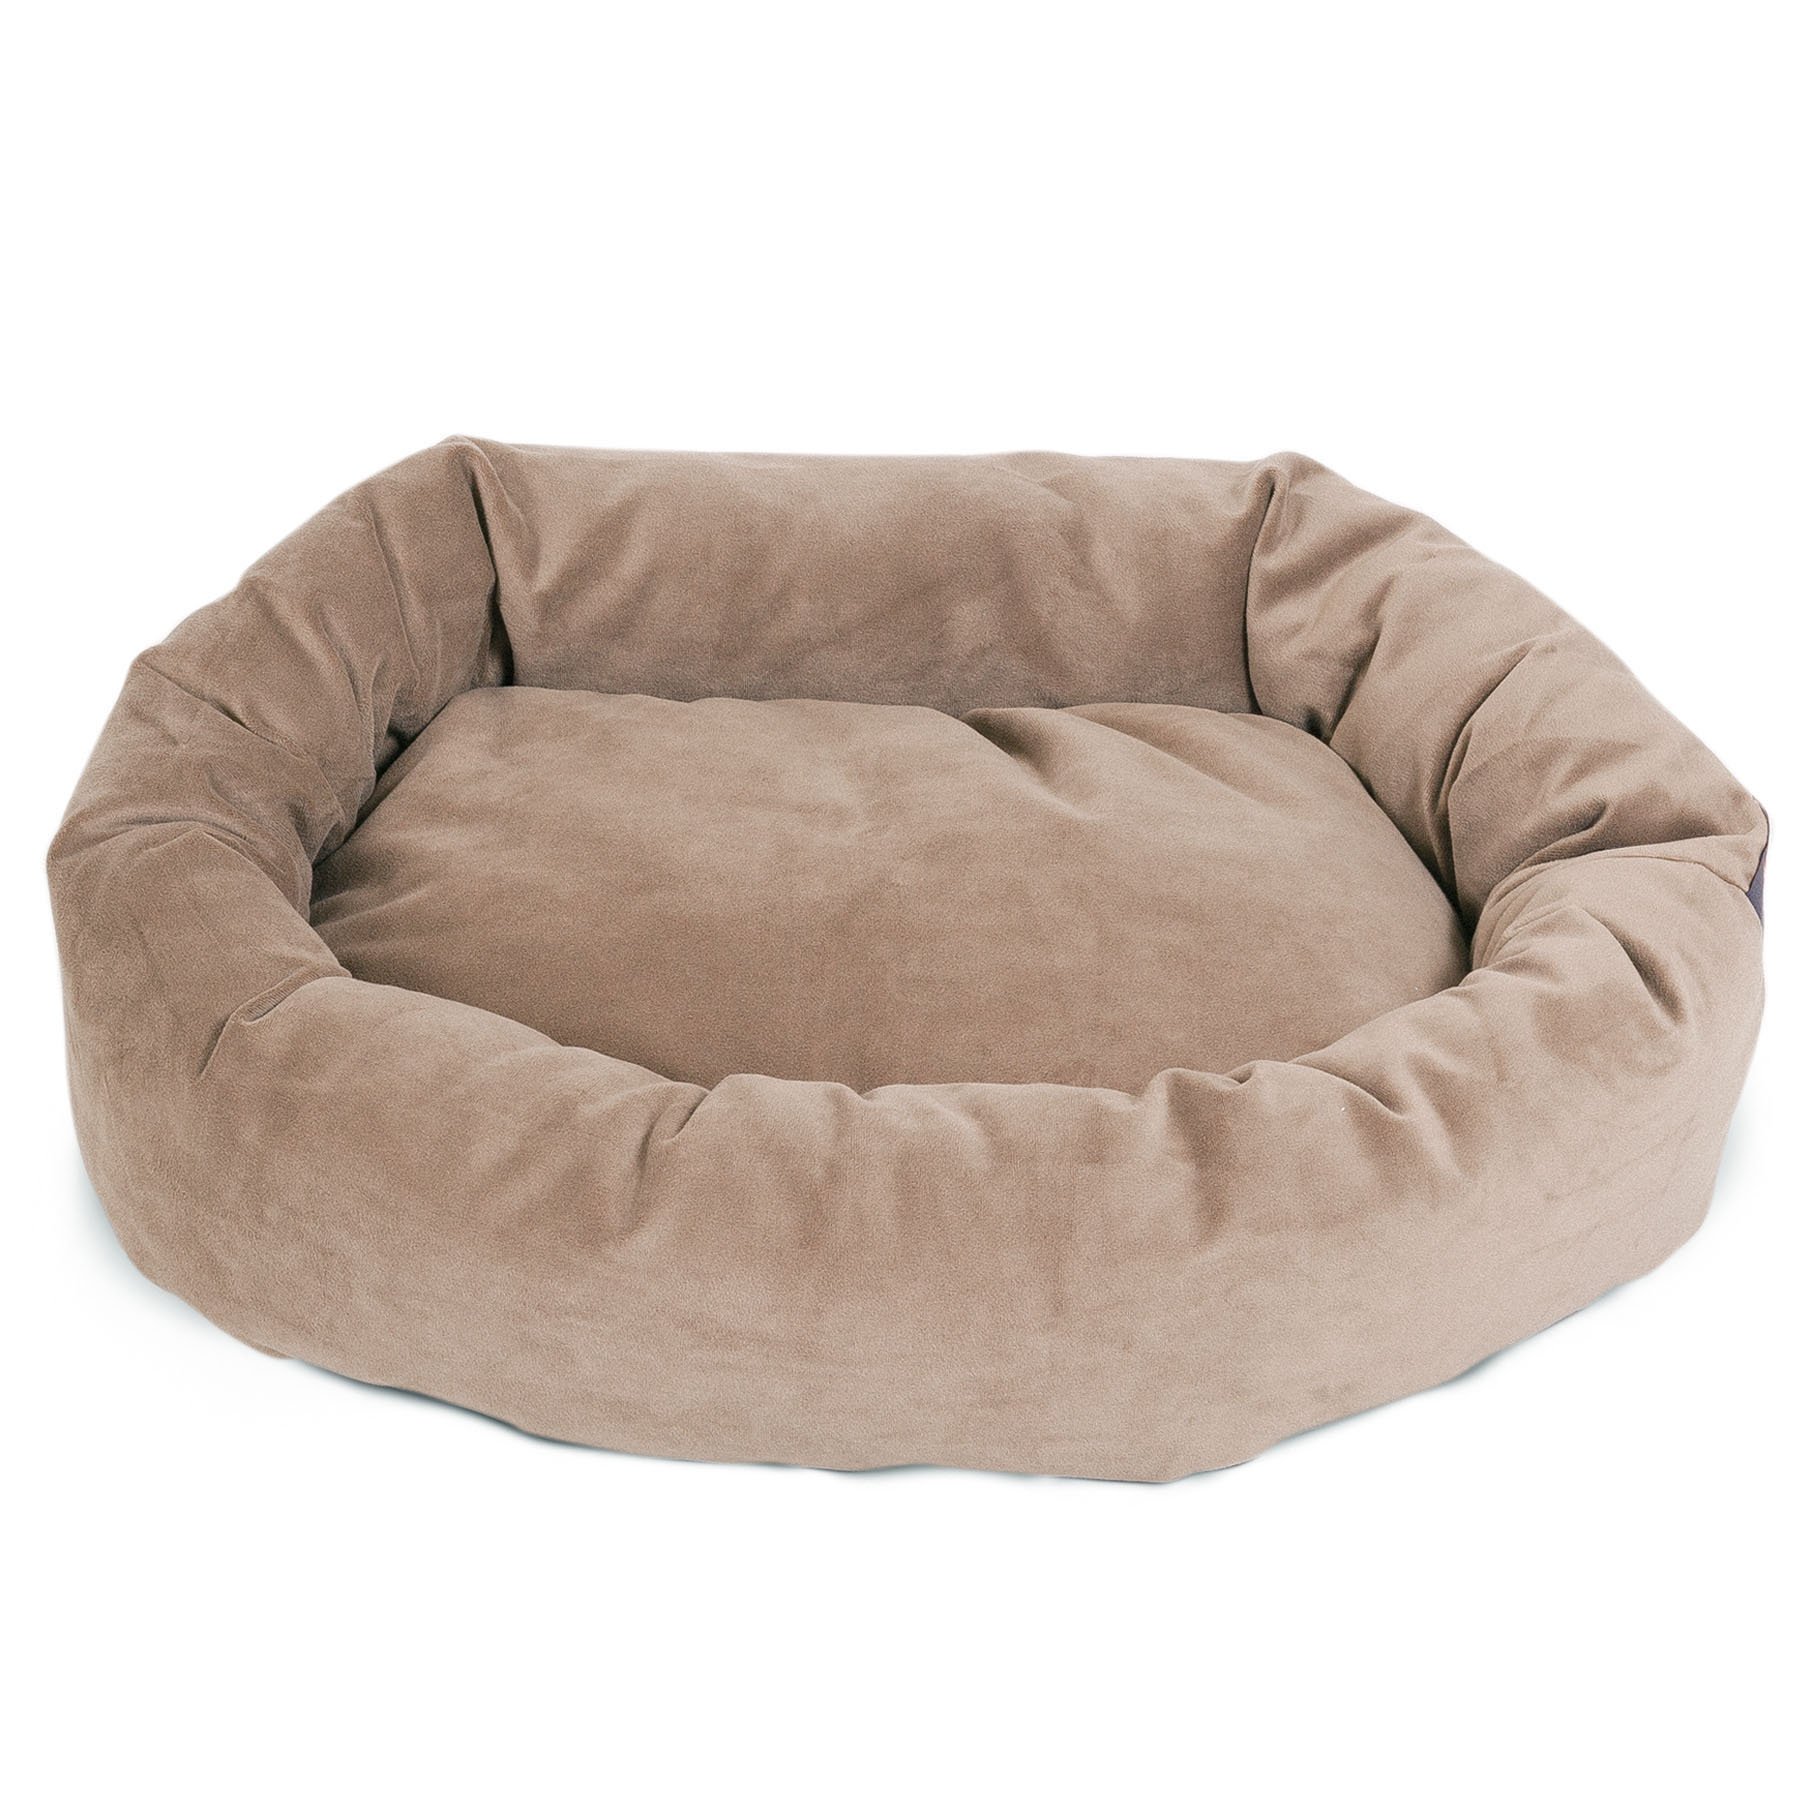 Majestic Pet Products Suede Dog Bed